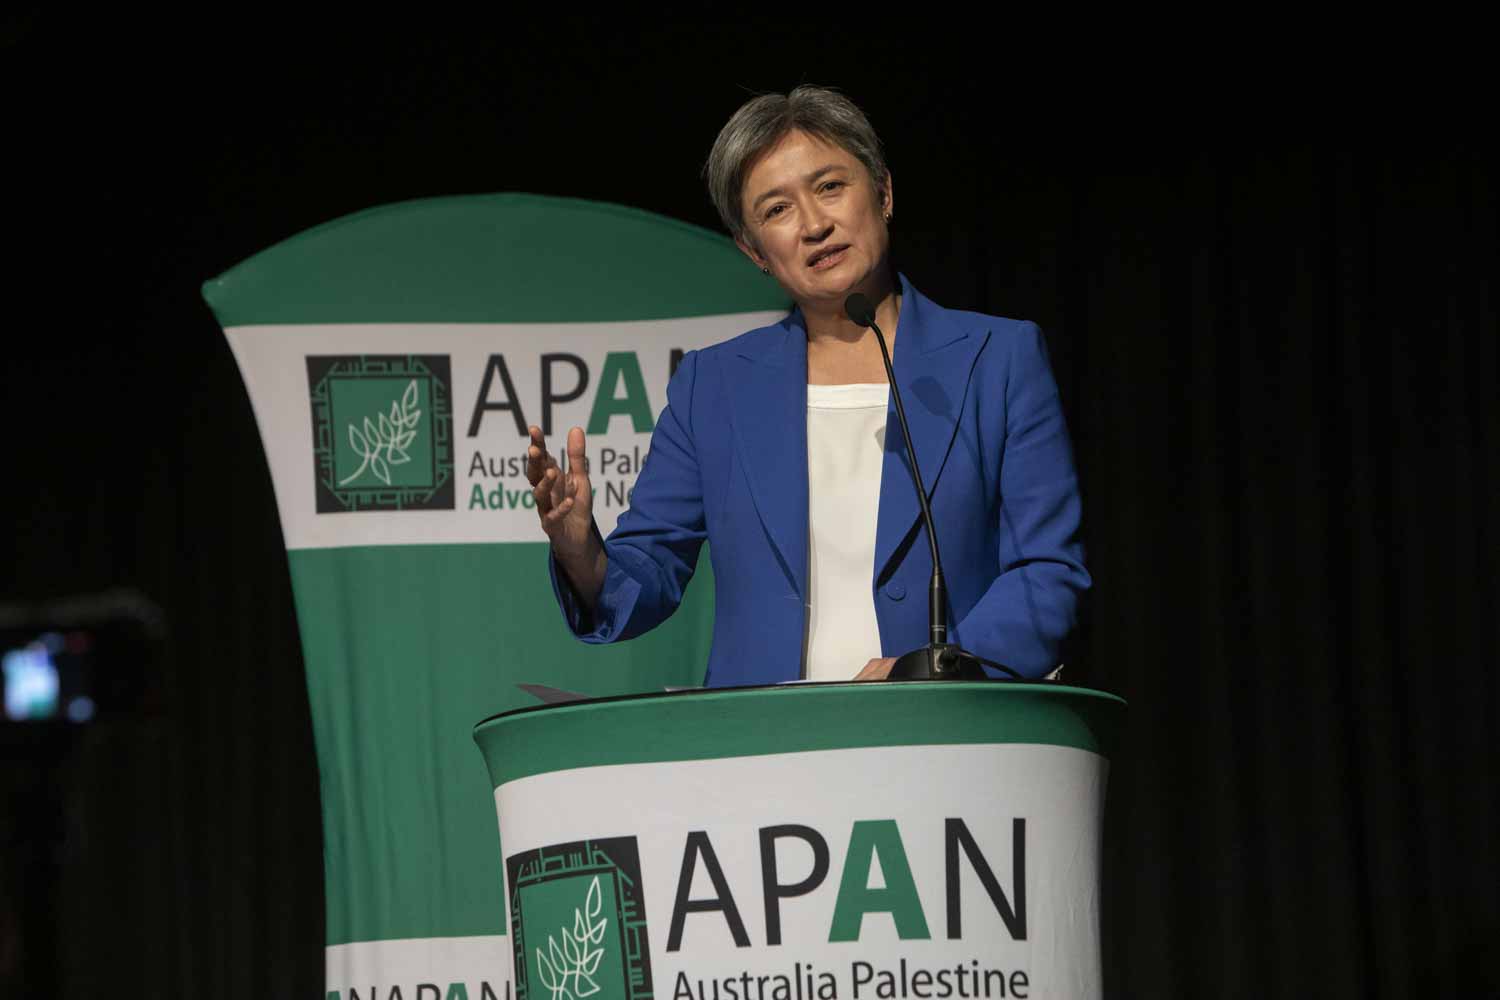 Photo of Penny Wong with APAN banner